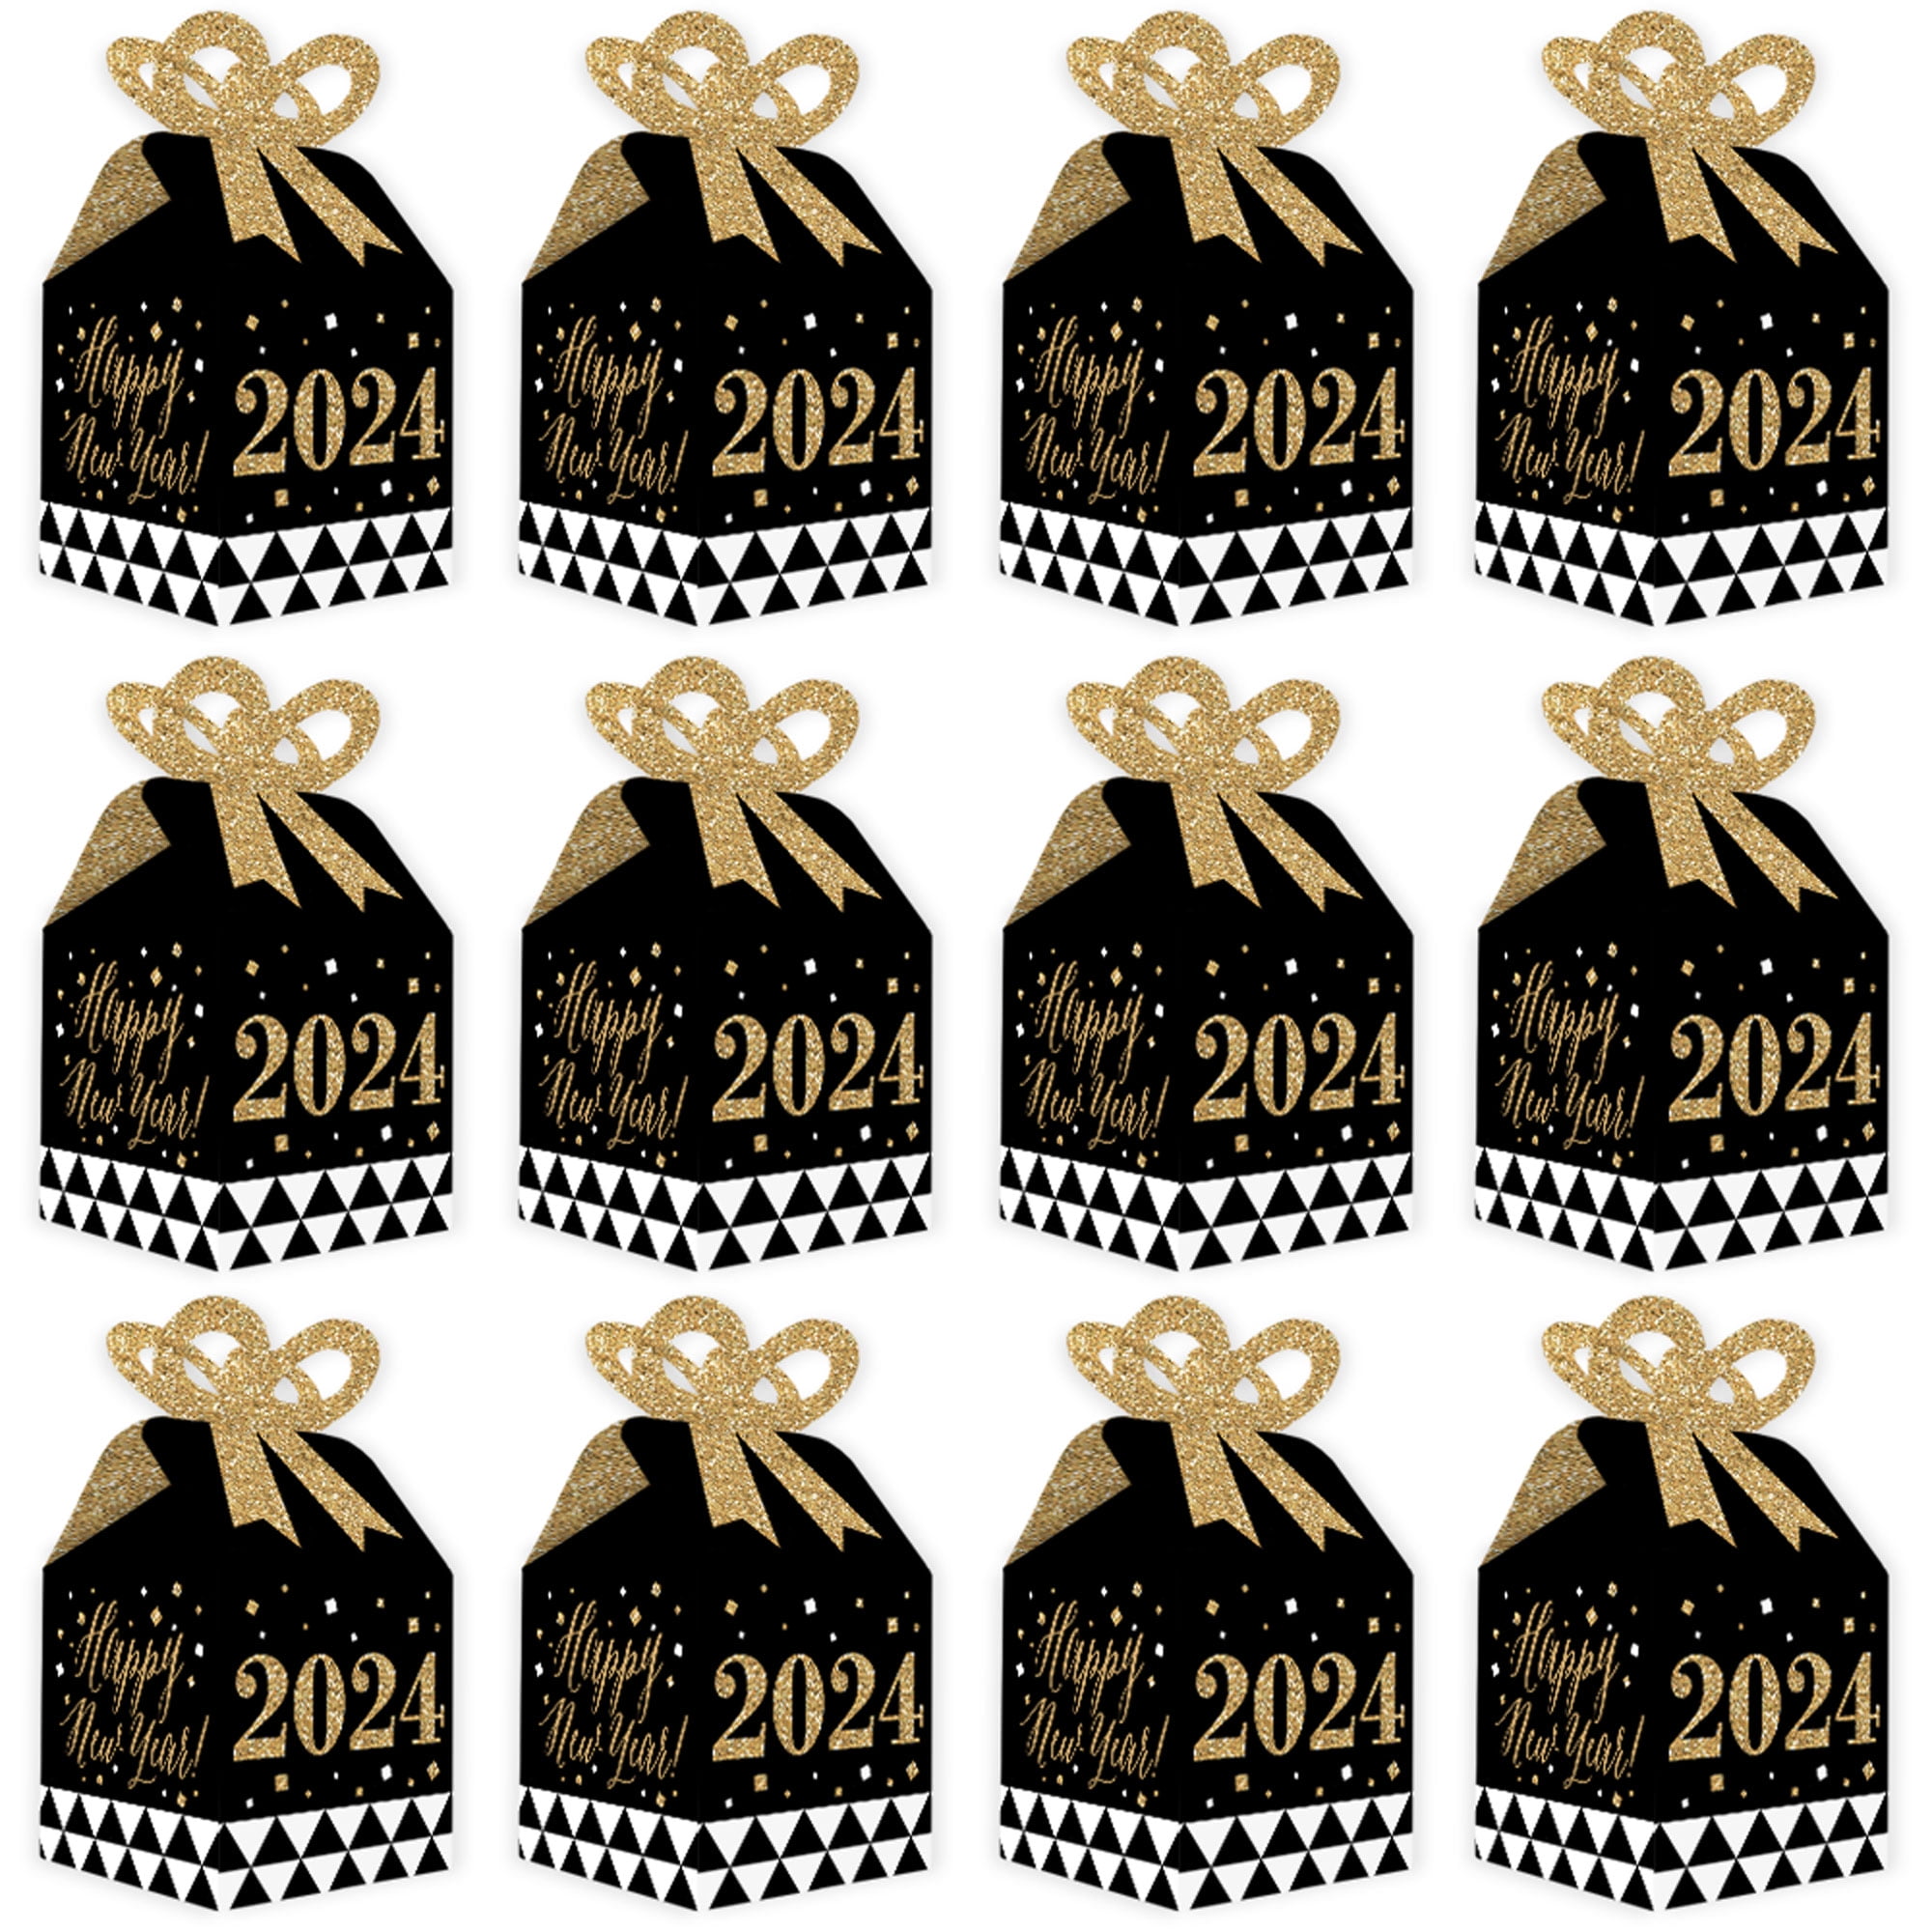 Five Party Gift - 60+ Gift Ideas for 2024